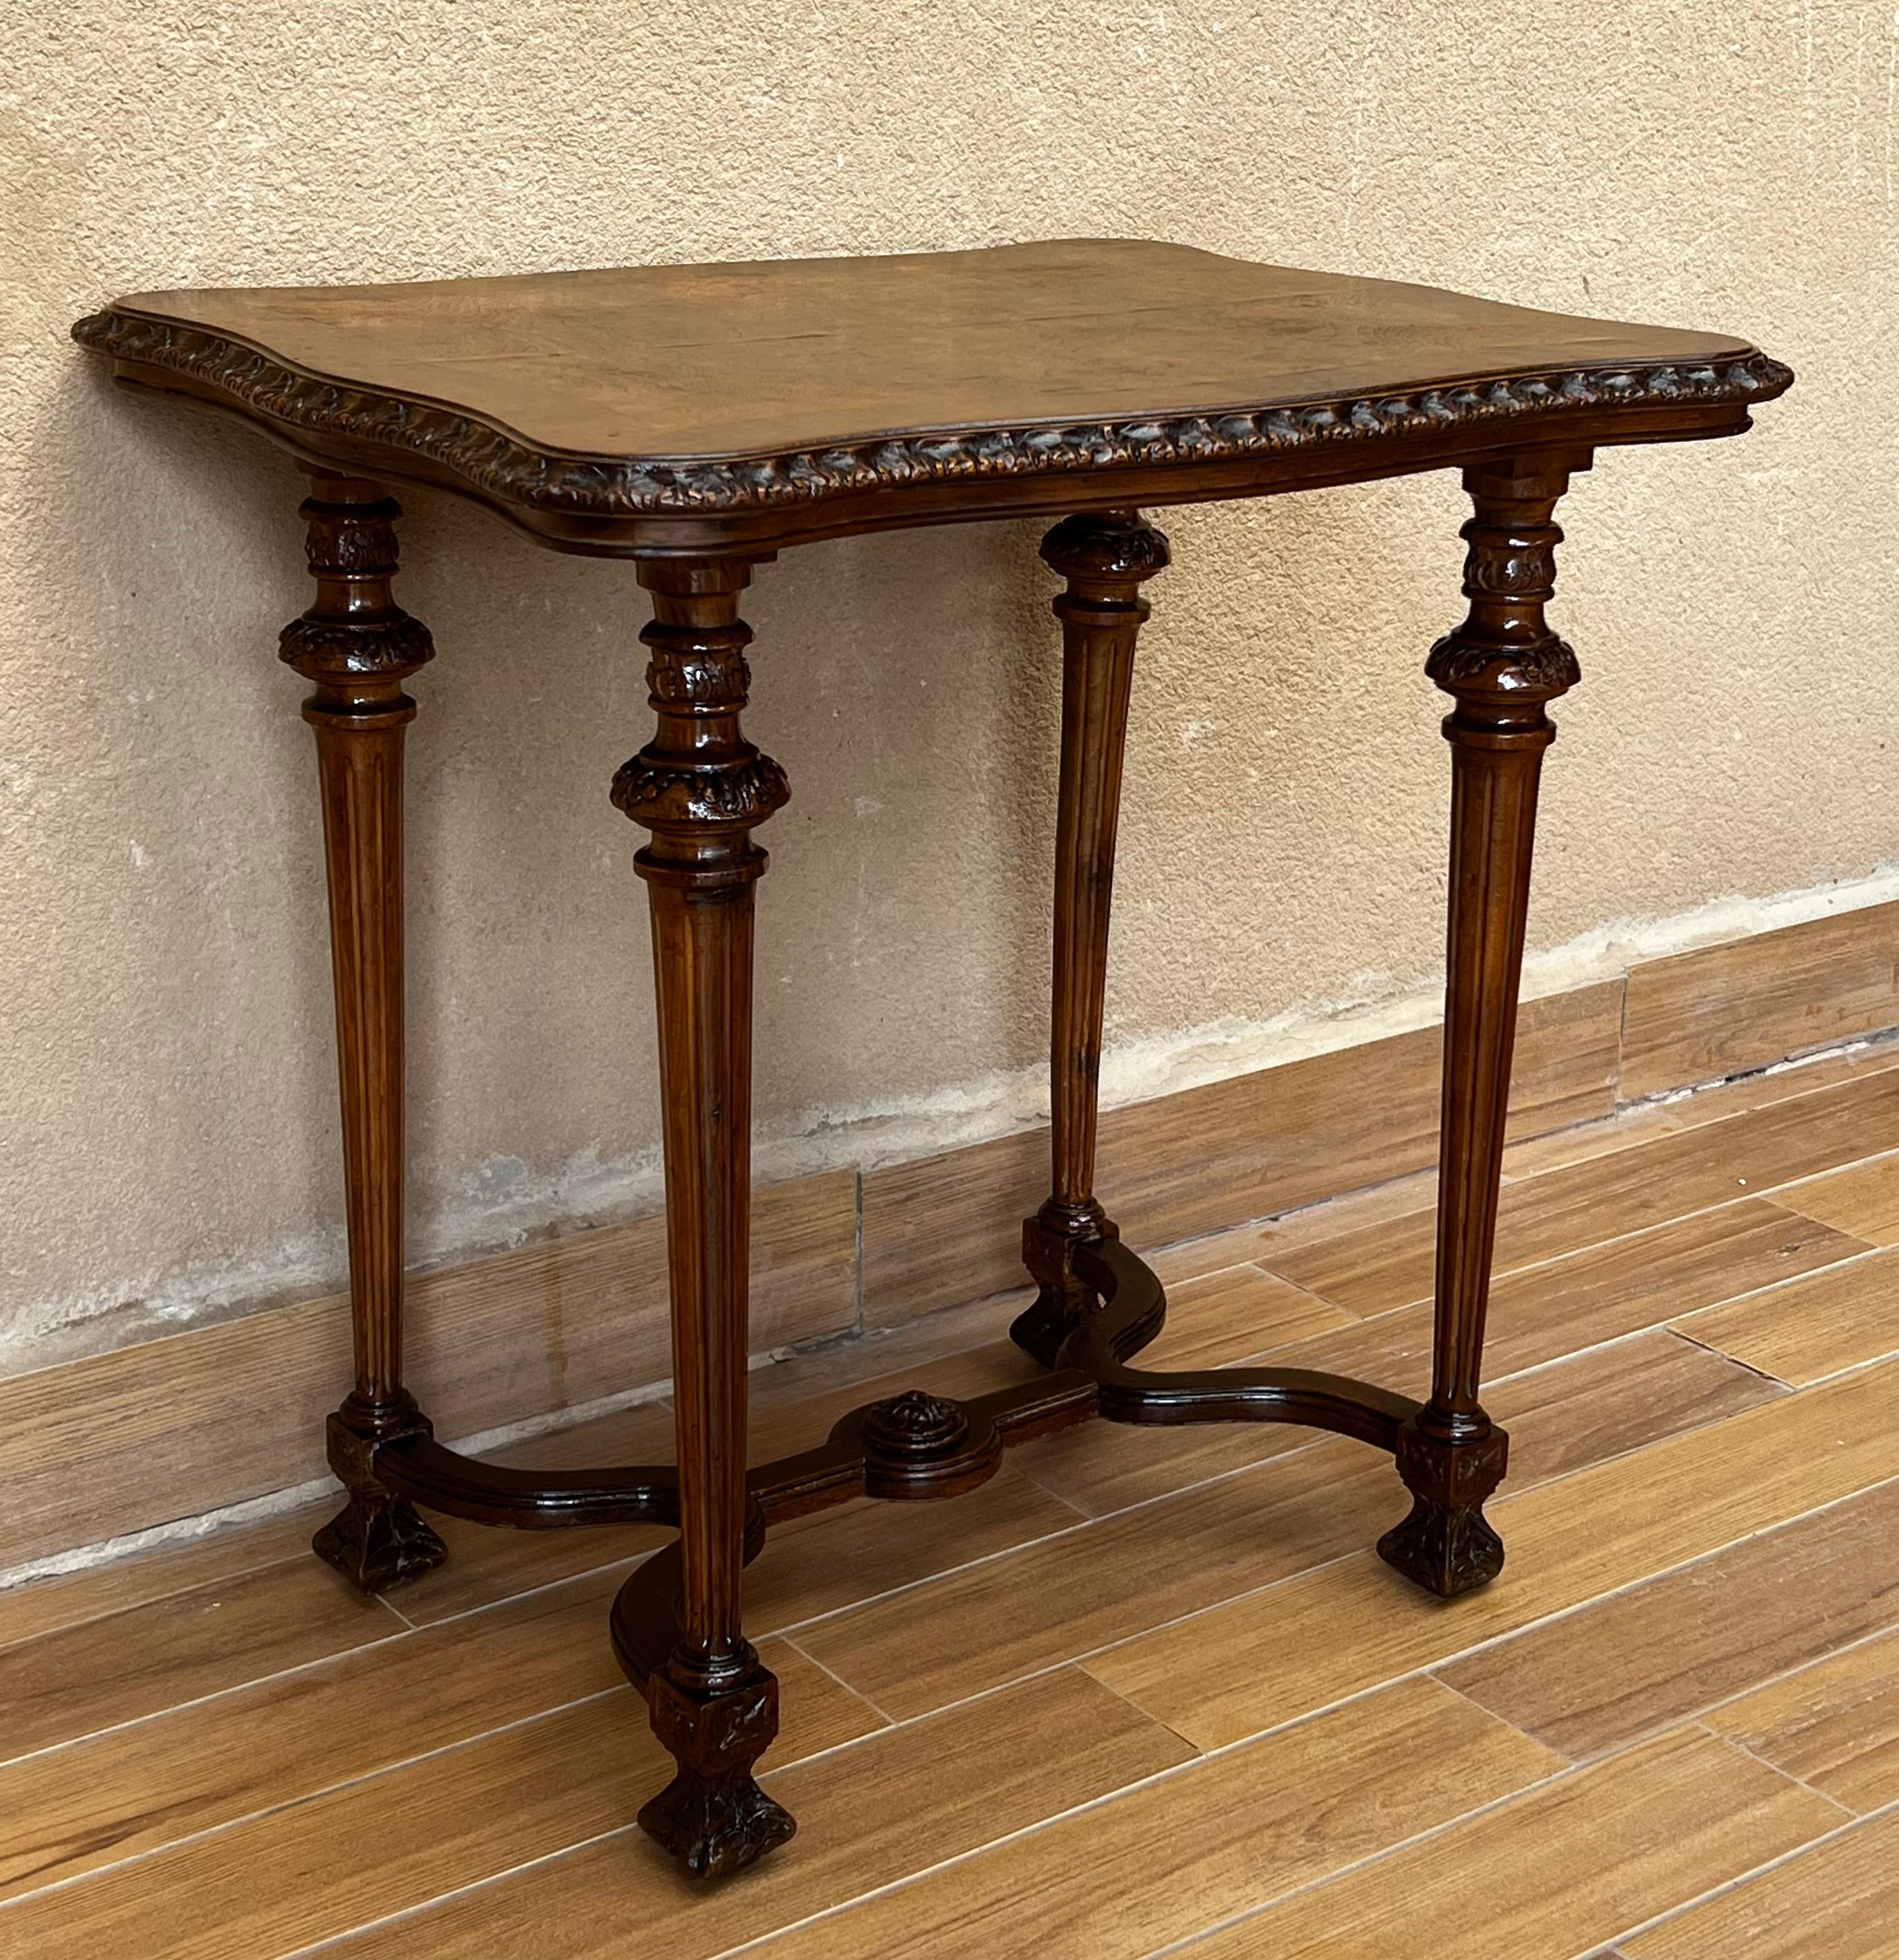 Spanish Colonial Italian 1800s Walnut Side Table with Carved Apron and Cabriole Legs